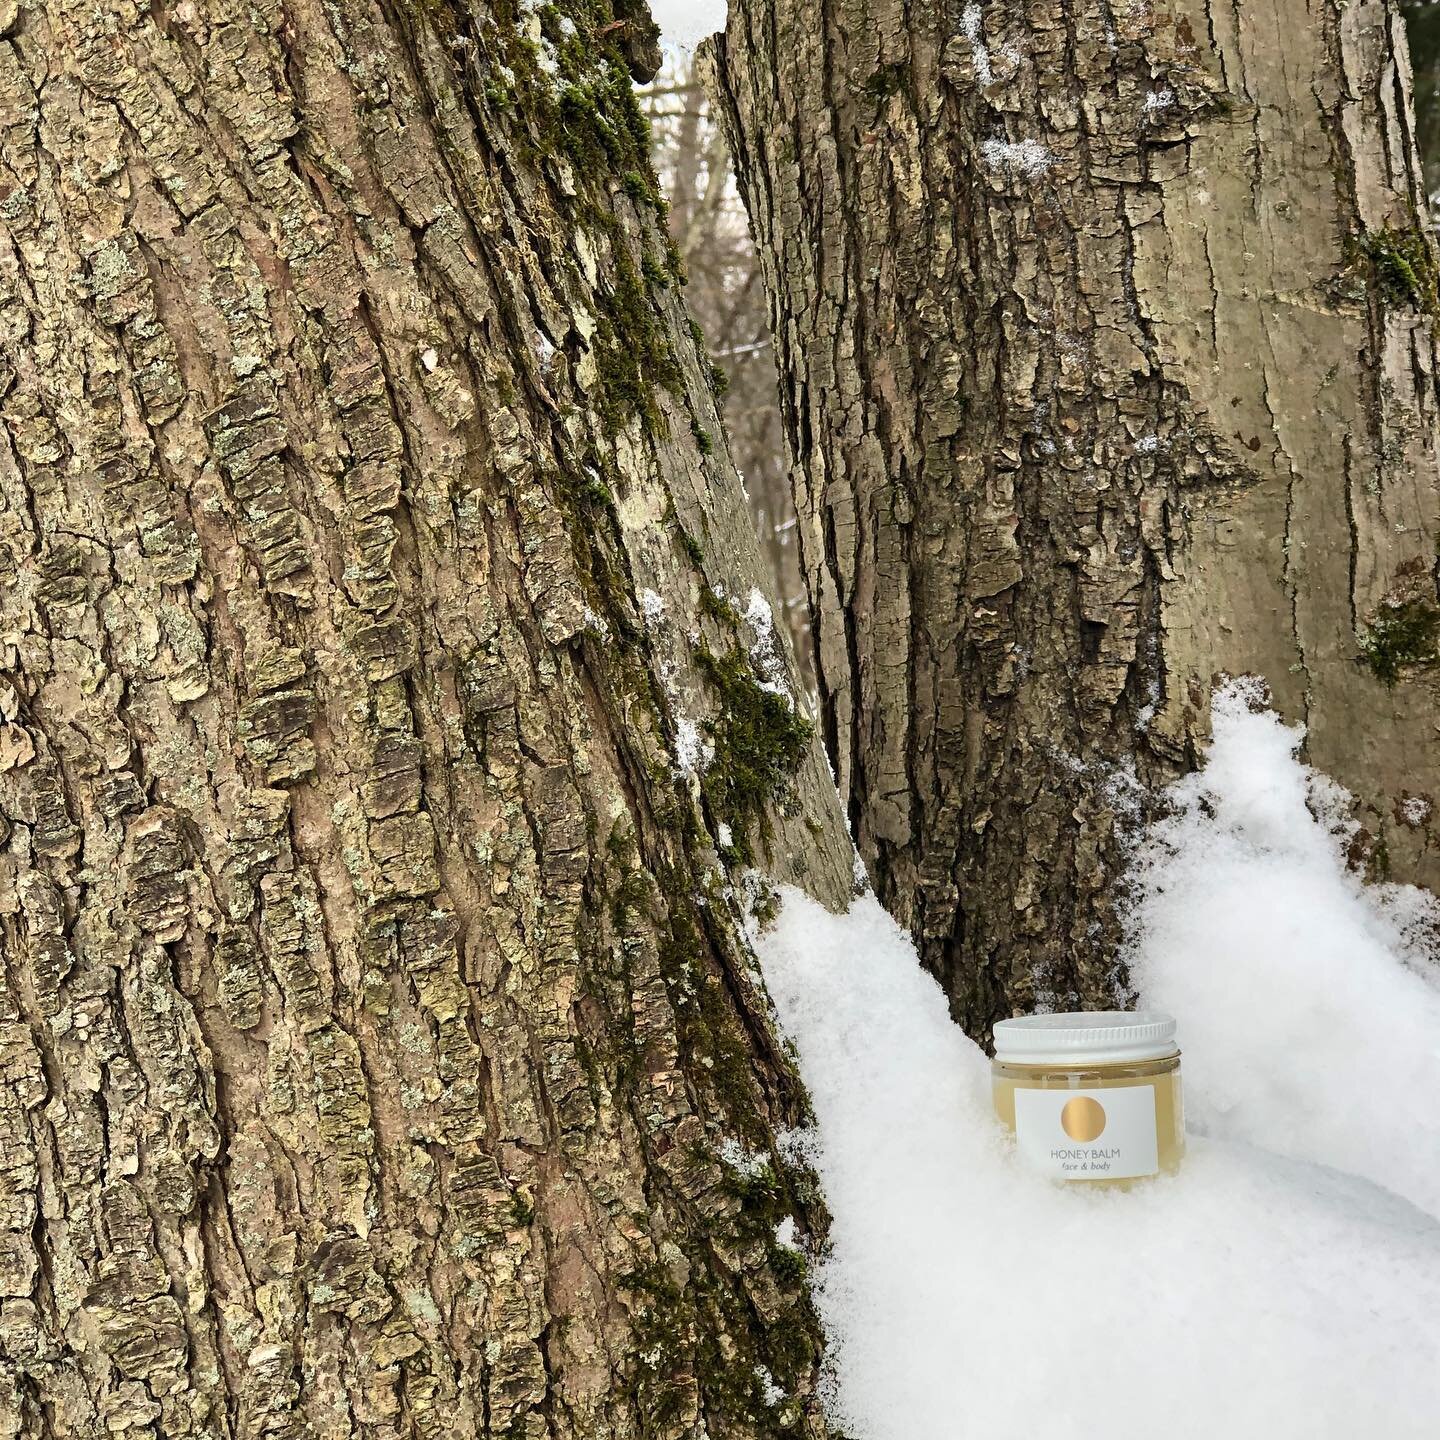 our balm contains ingredients so natural they could be found in the woods:
pure beeswax, organic fair trade cocoa butter, organic avocado oil